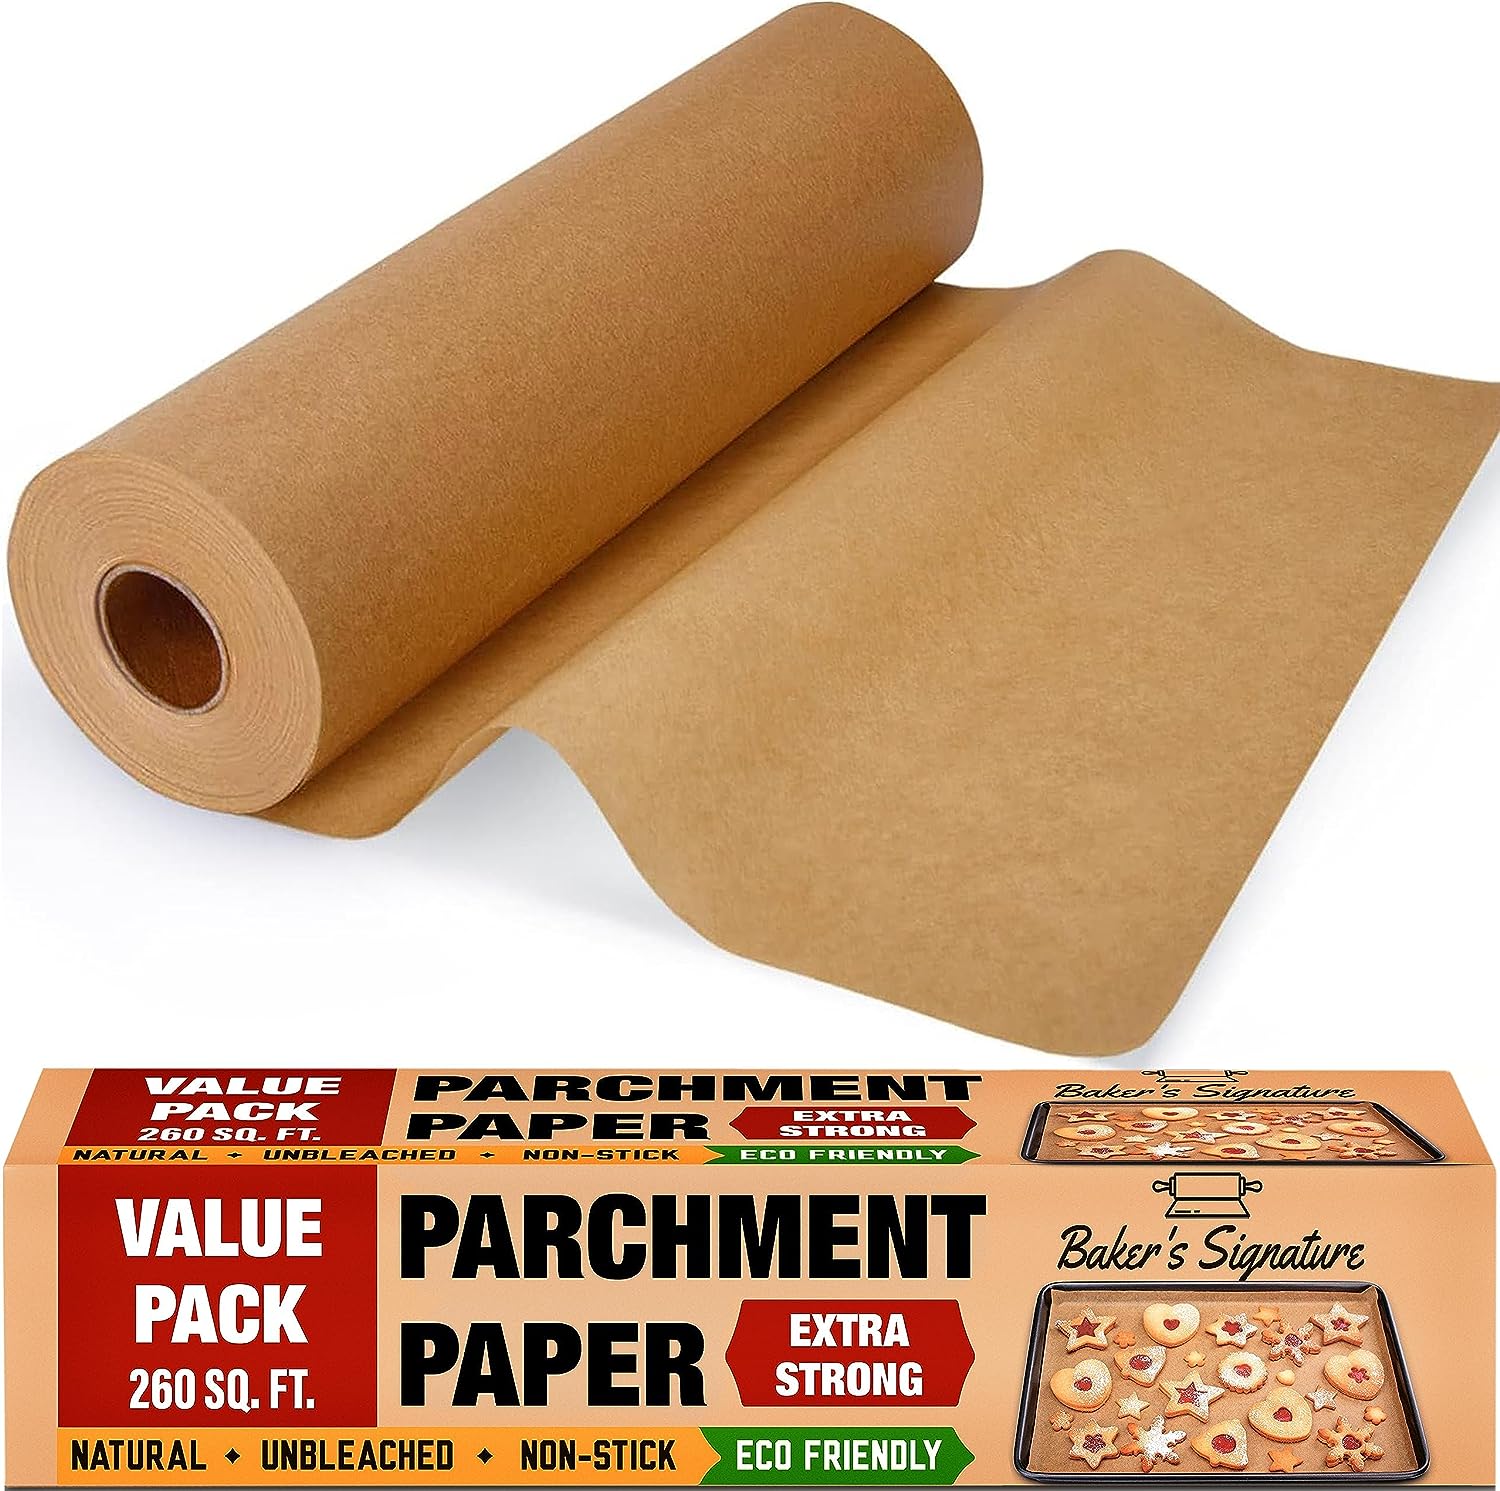 Parchment Paper Baking Sheets by Baker's Signature | Precut Silicone Coated  & Unbleached – Will Not Curl or Burn – Non-Toxic & Comes in Convenient